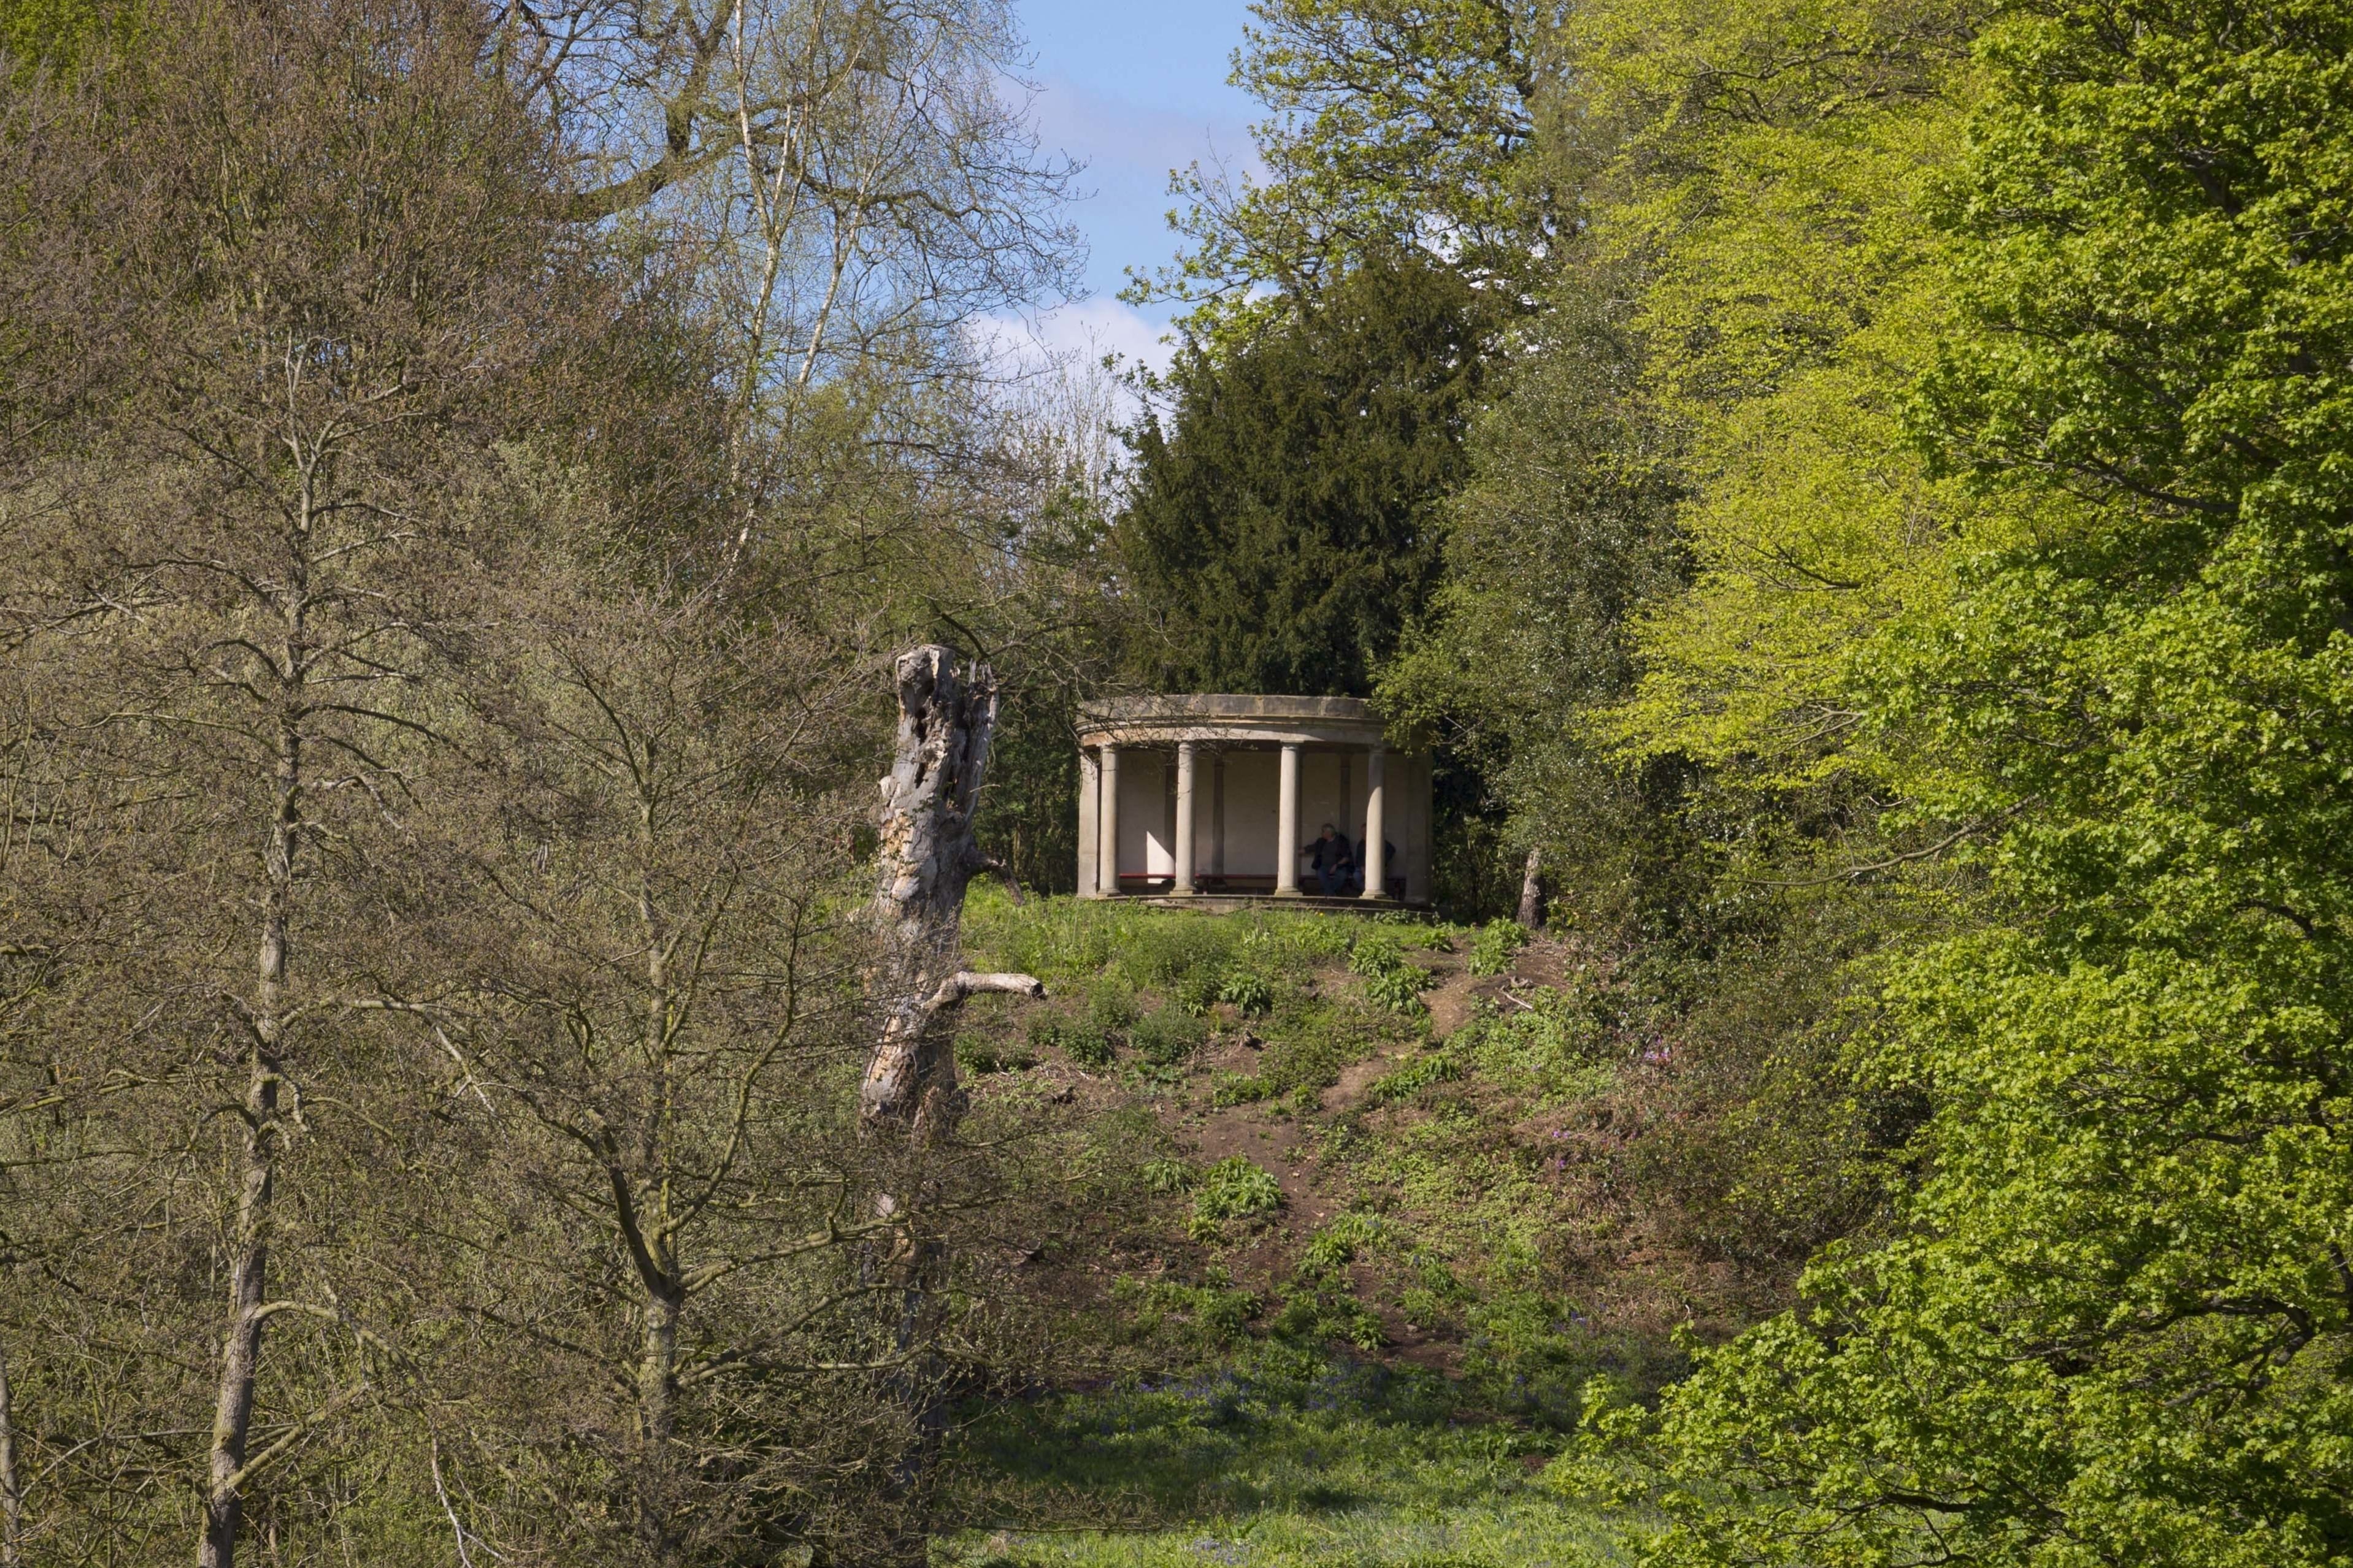 Building resembling a Greek temple on a hill above the lake, surrounded by trees.